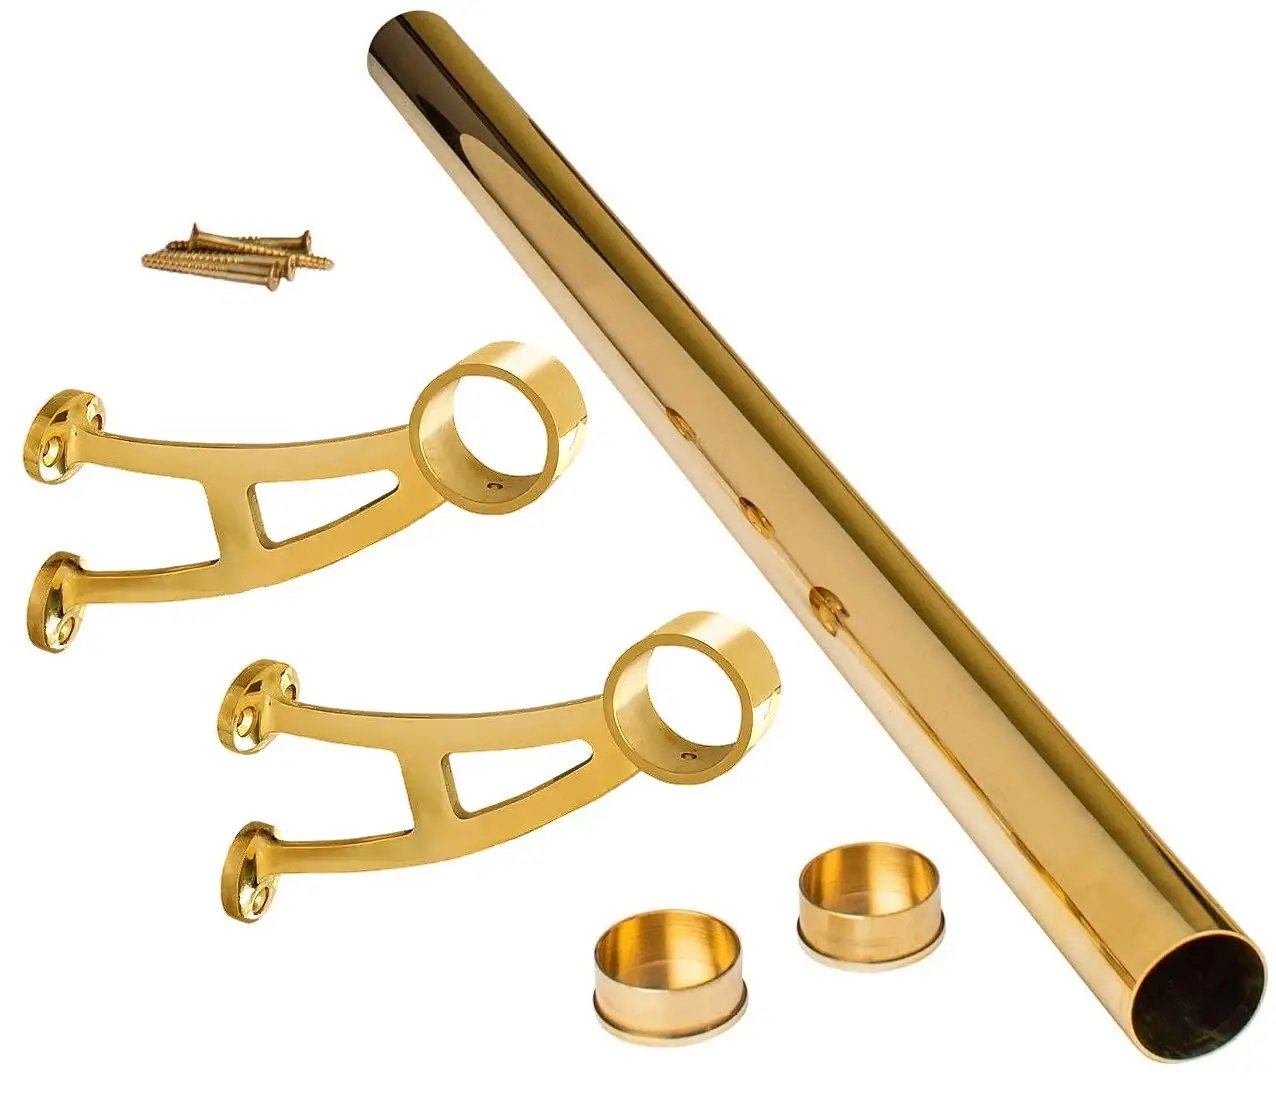 4 FT Solid Polished Brass Bar Foot Rail Kit - Trade Diversified